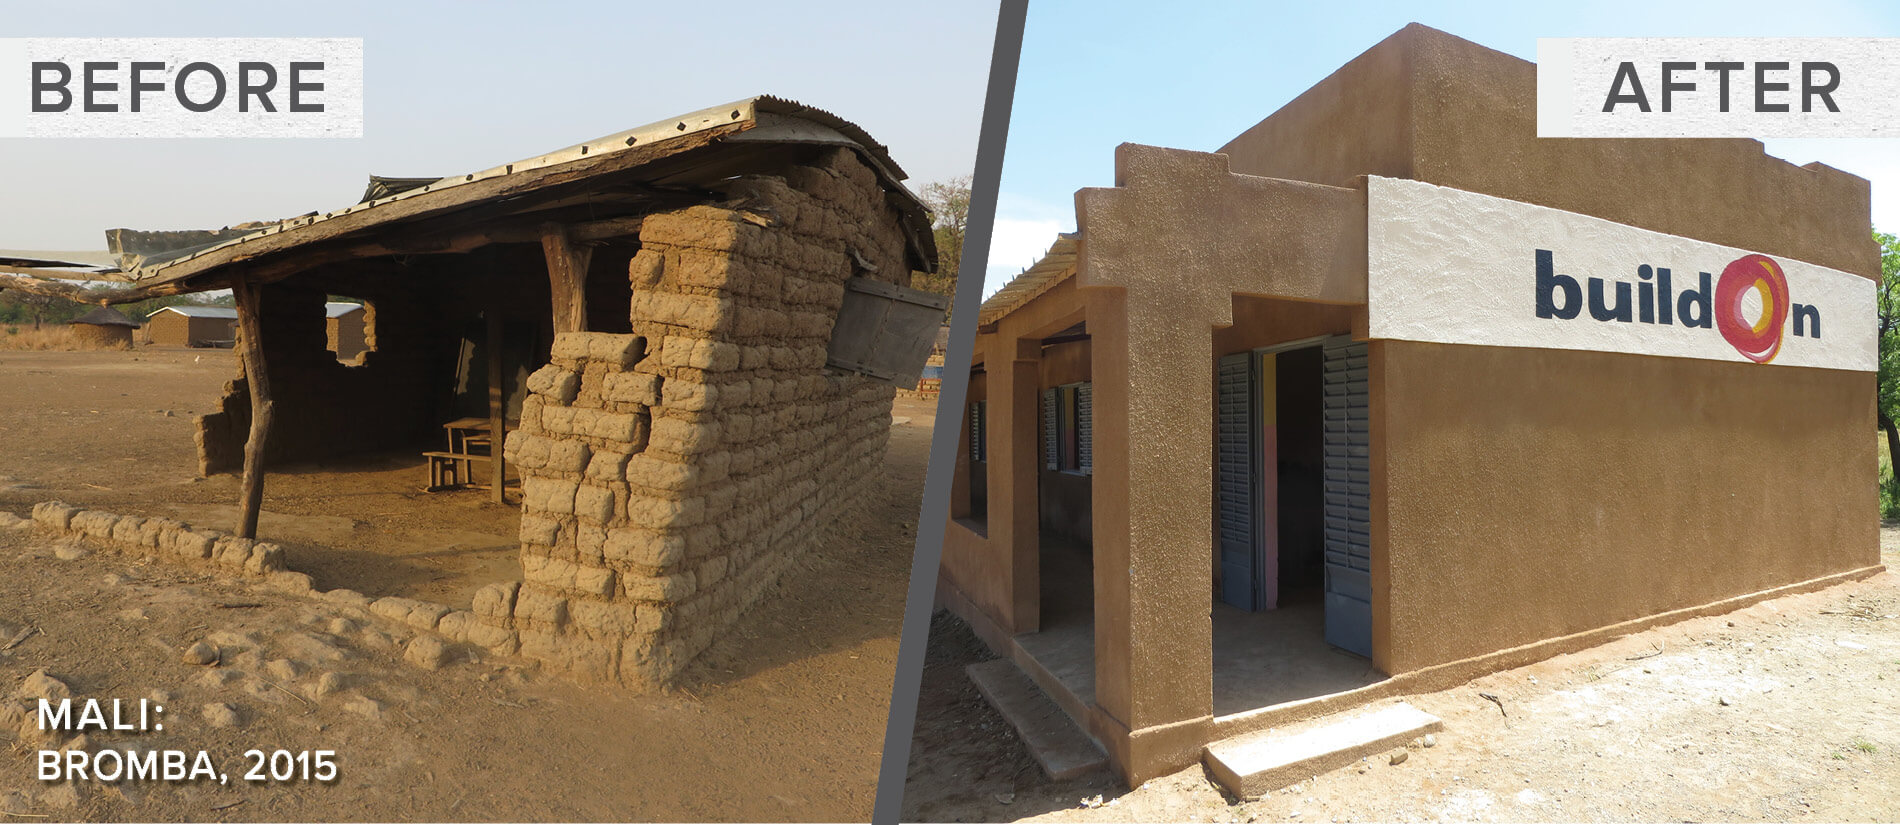 buildOn - Bromba, Mali - Before and After_1900x825 - Dual Concept - 2021 (1)